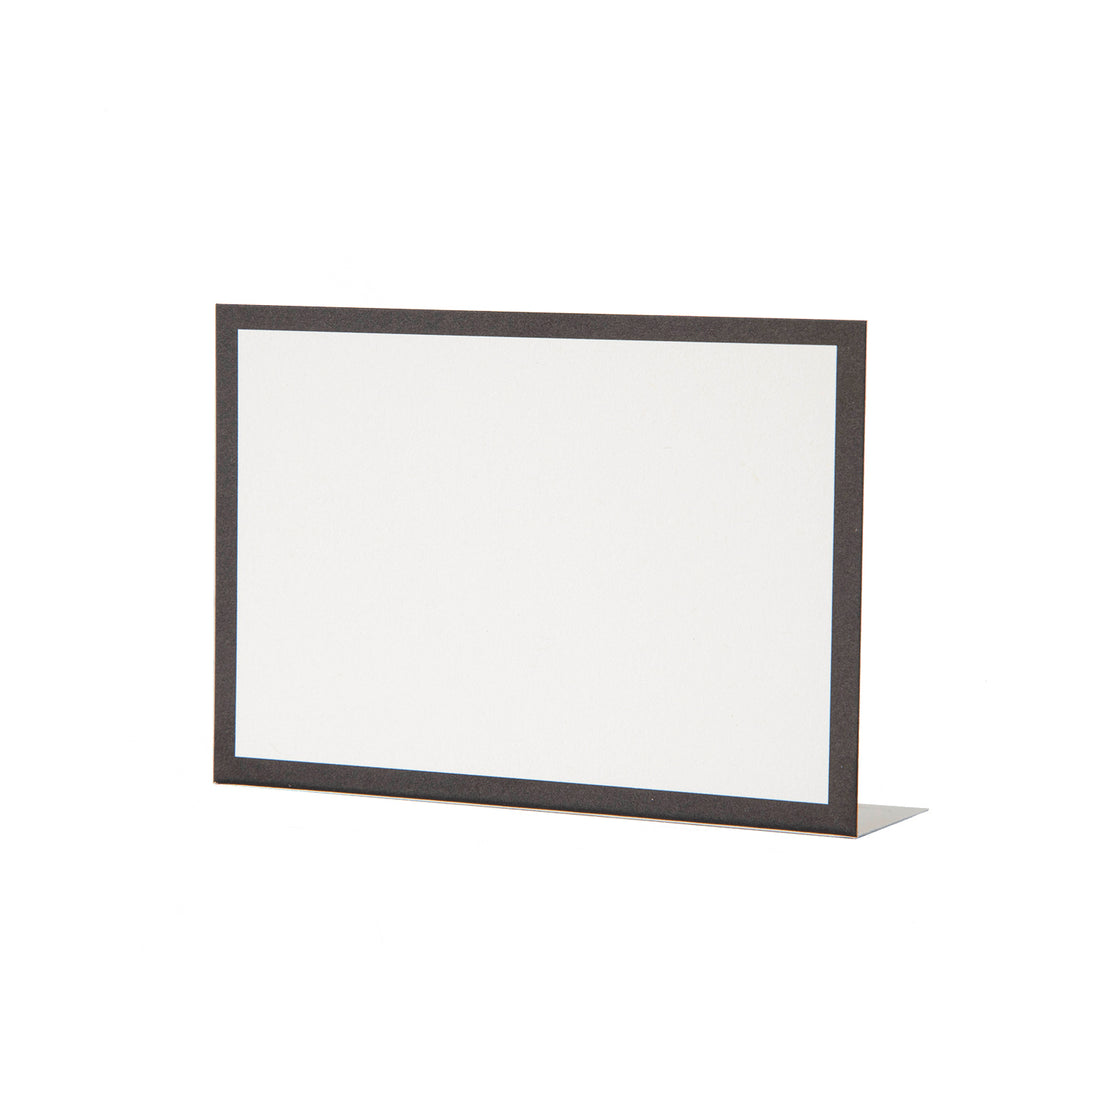 A free-standing, rectangular white table card with a simple black frame around the edges.